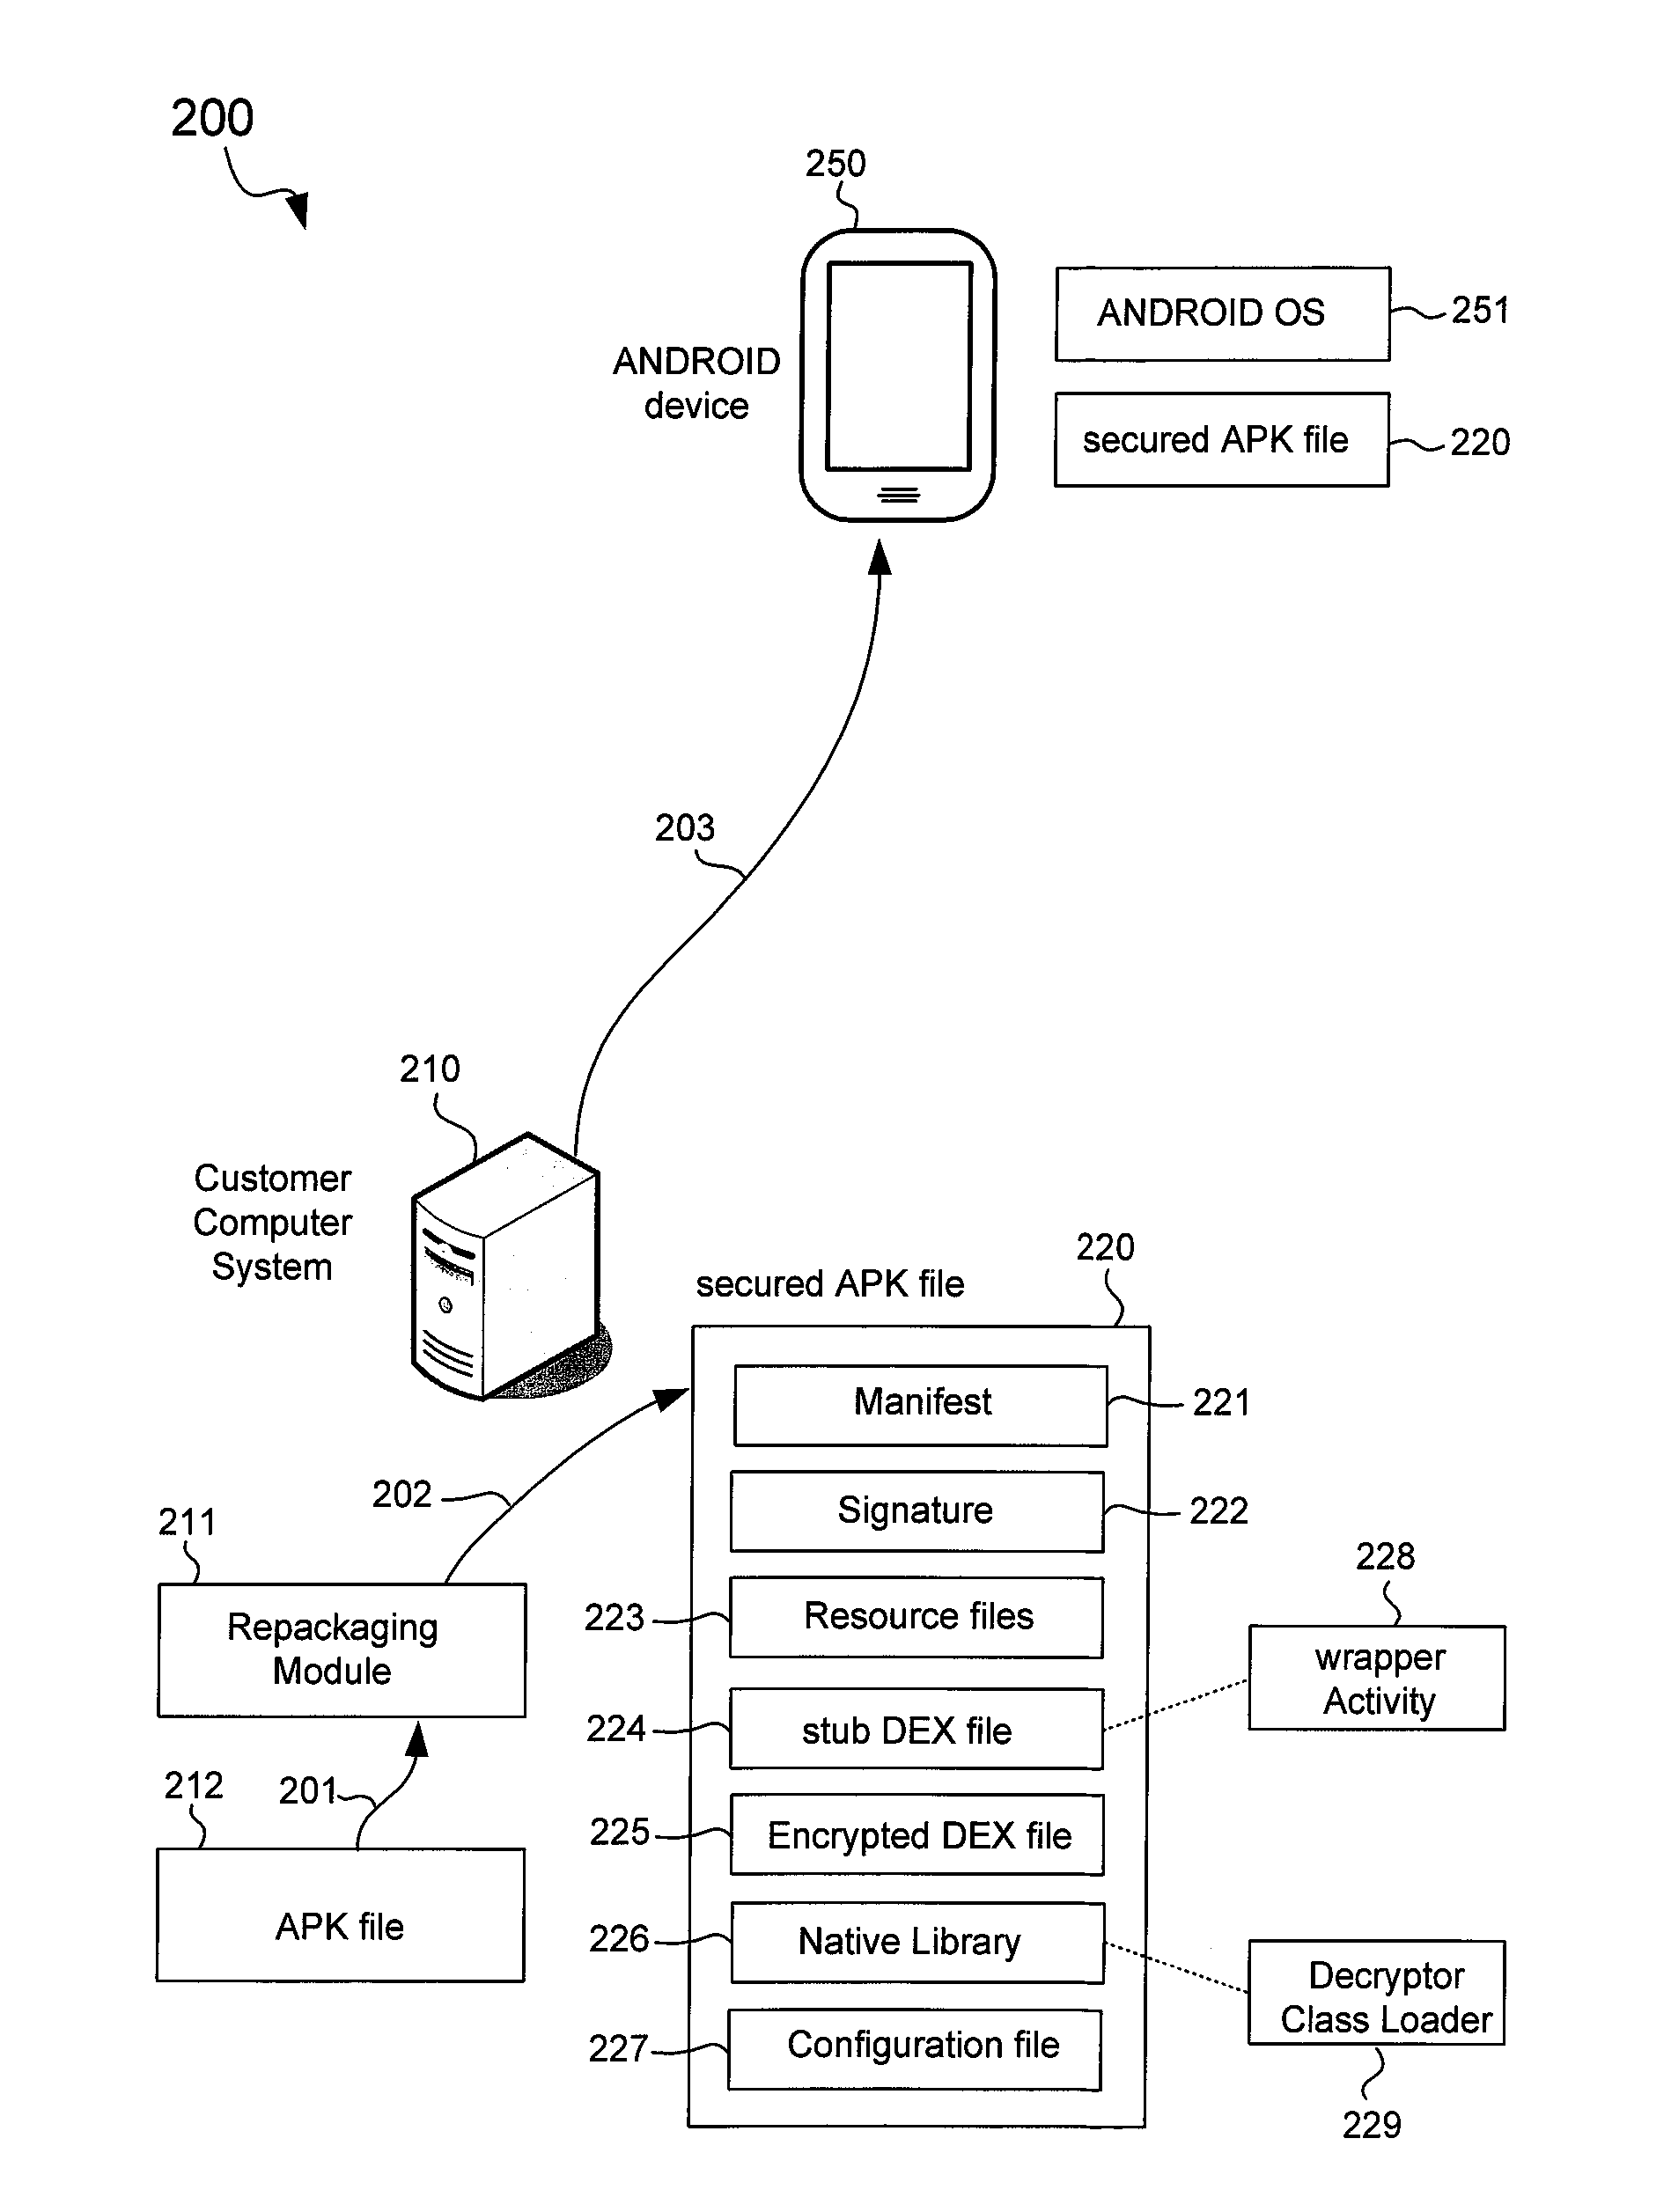 Secured application package files for mobile computing devices